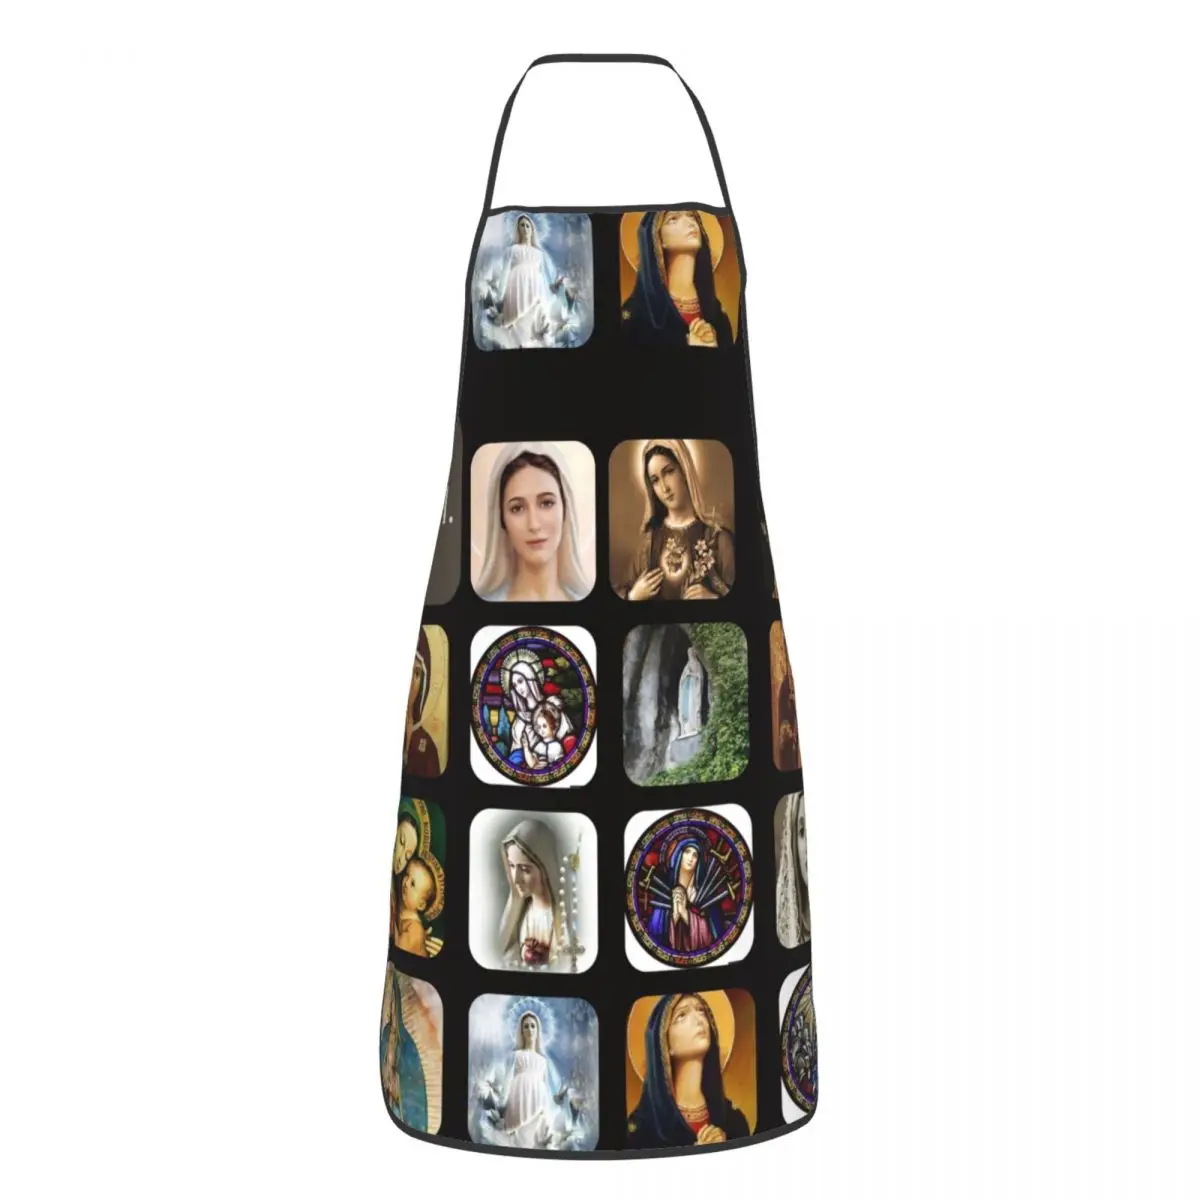 

B.V.M Blessed Virgin Mary Mother Of God Kitchen Baking Aprons Anti-greasy Pinafores for Men Women Chef Home Cleaning Gardening